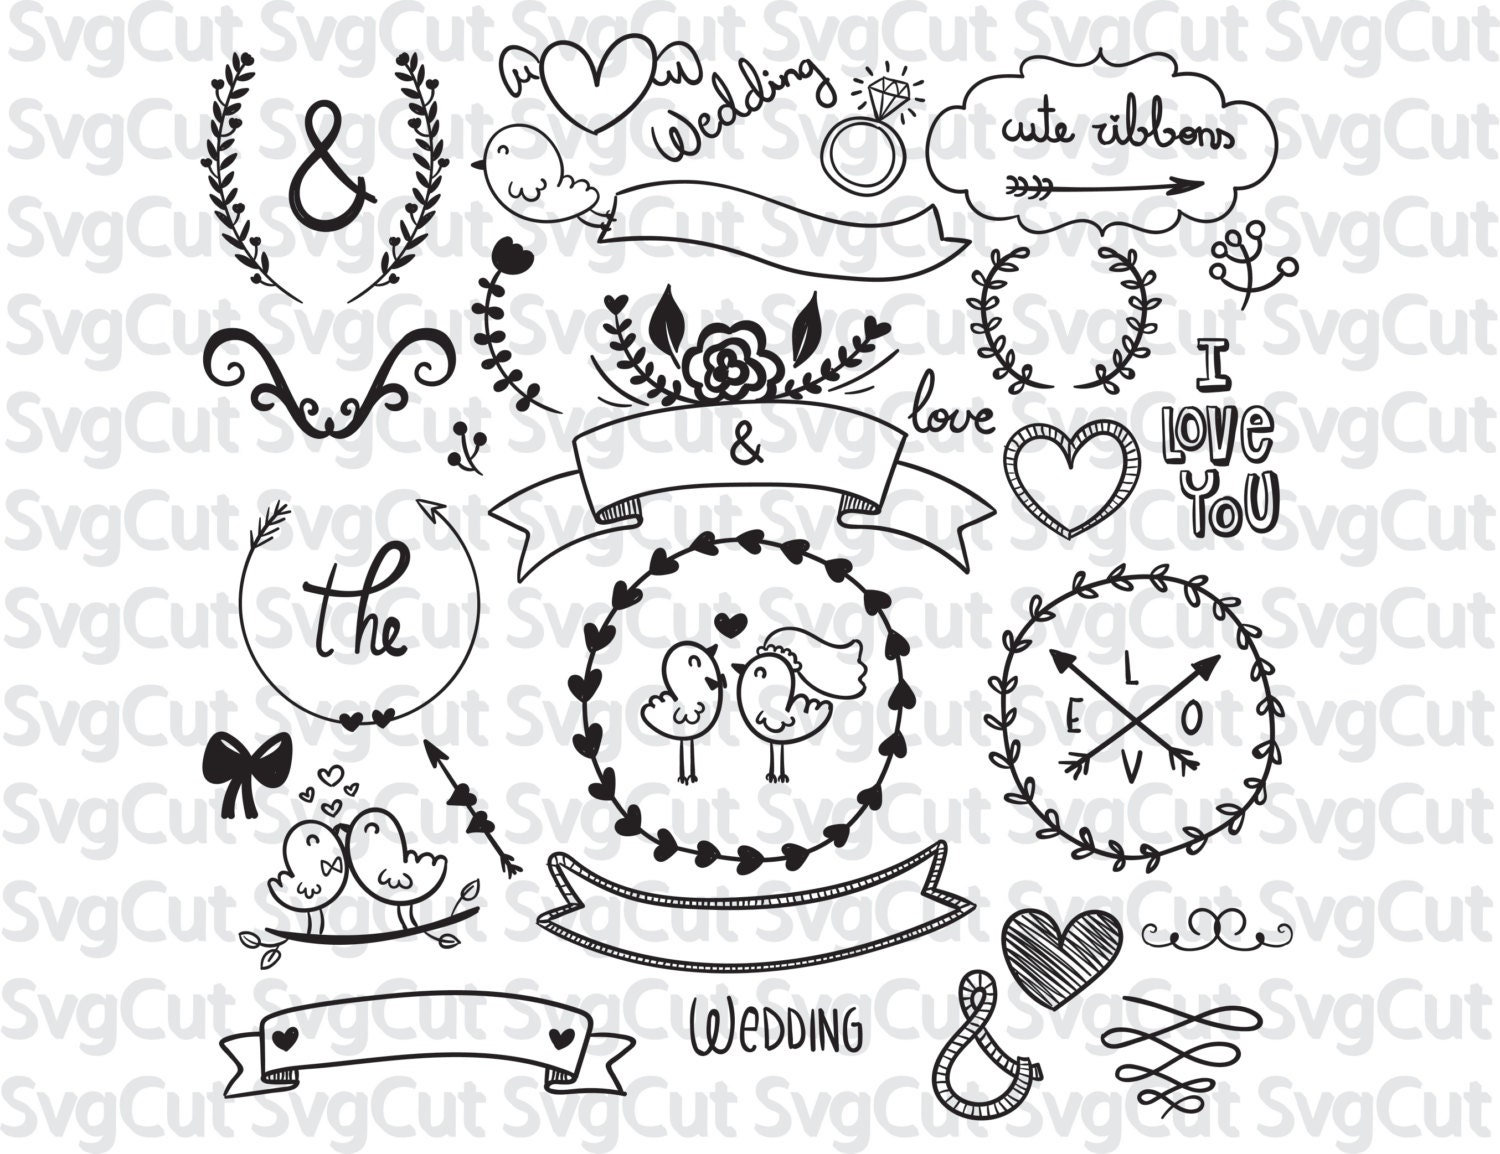 Download Wedding clipart Marriage SVG Cutting files for wedding